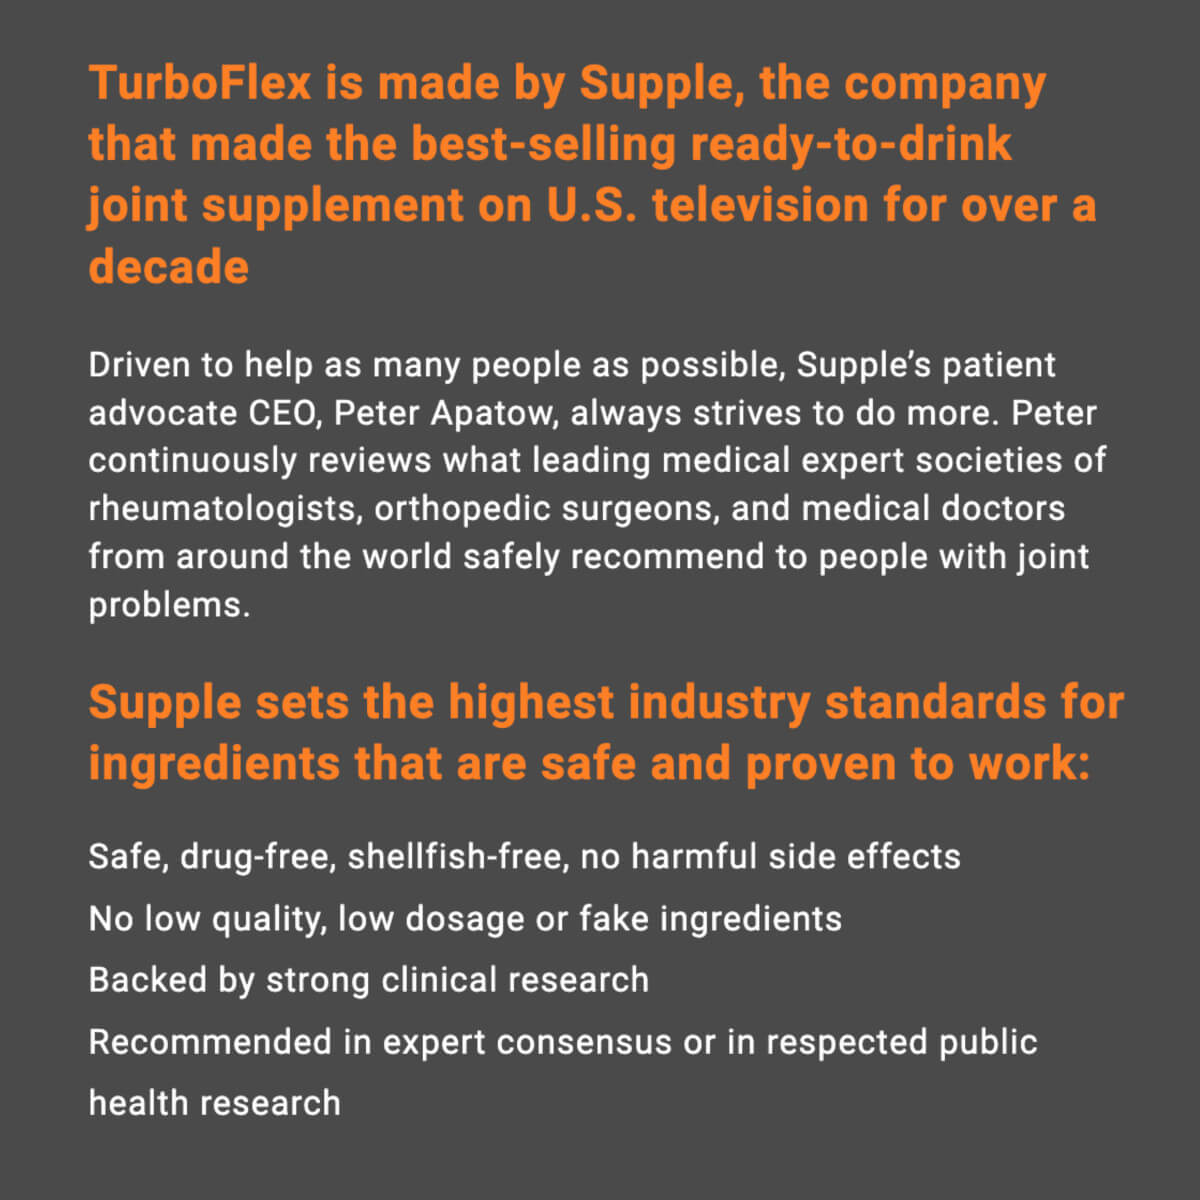 TurboFlex is made by Supple, the best-selling RTD joint health drink from television